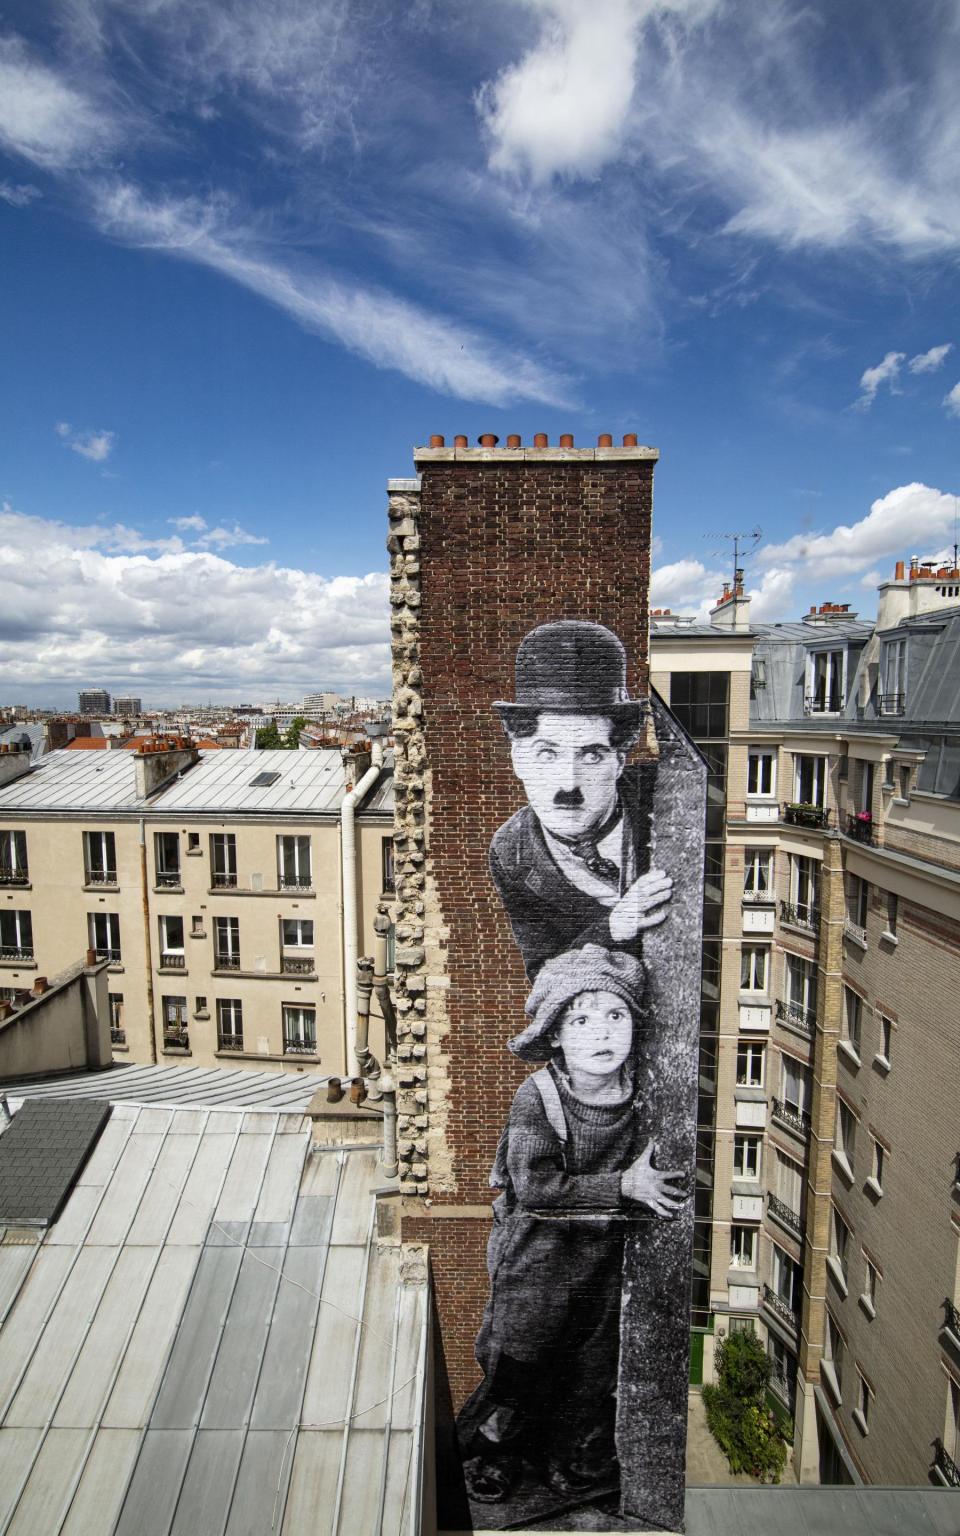 The exterior of Hotel Paradiso, complete with Charlie Chaplin mural  - Romain Ricard